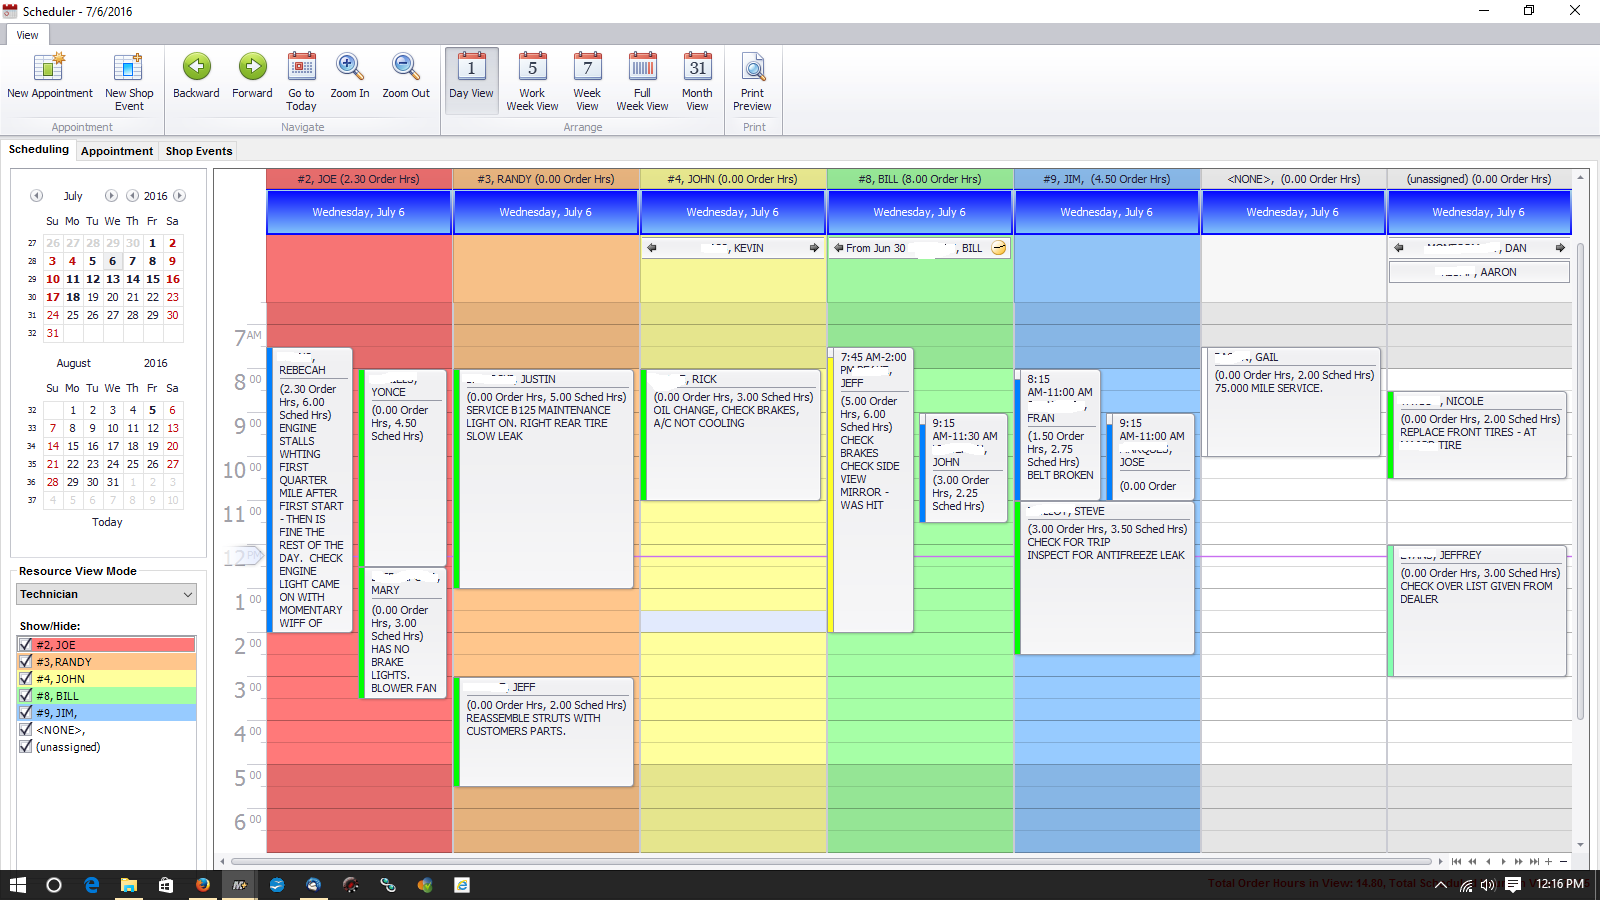 Screen shot of actual work in process shown in the scheduler